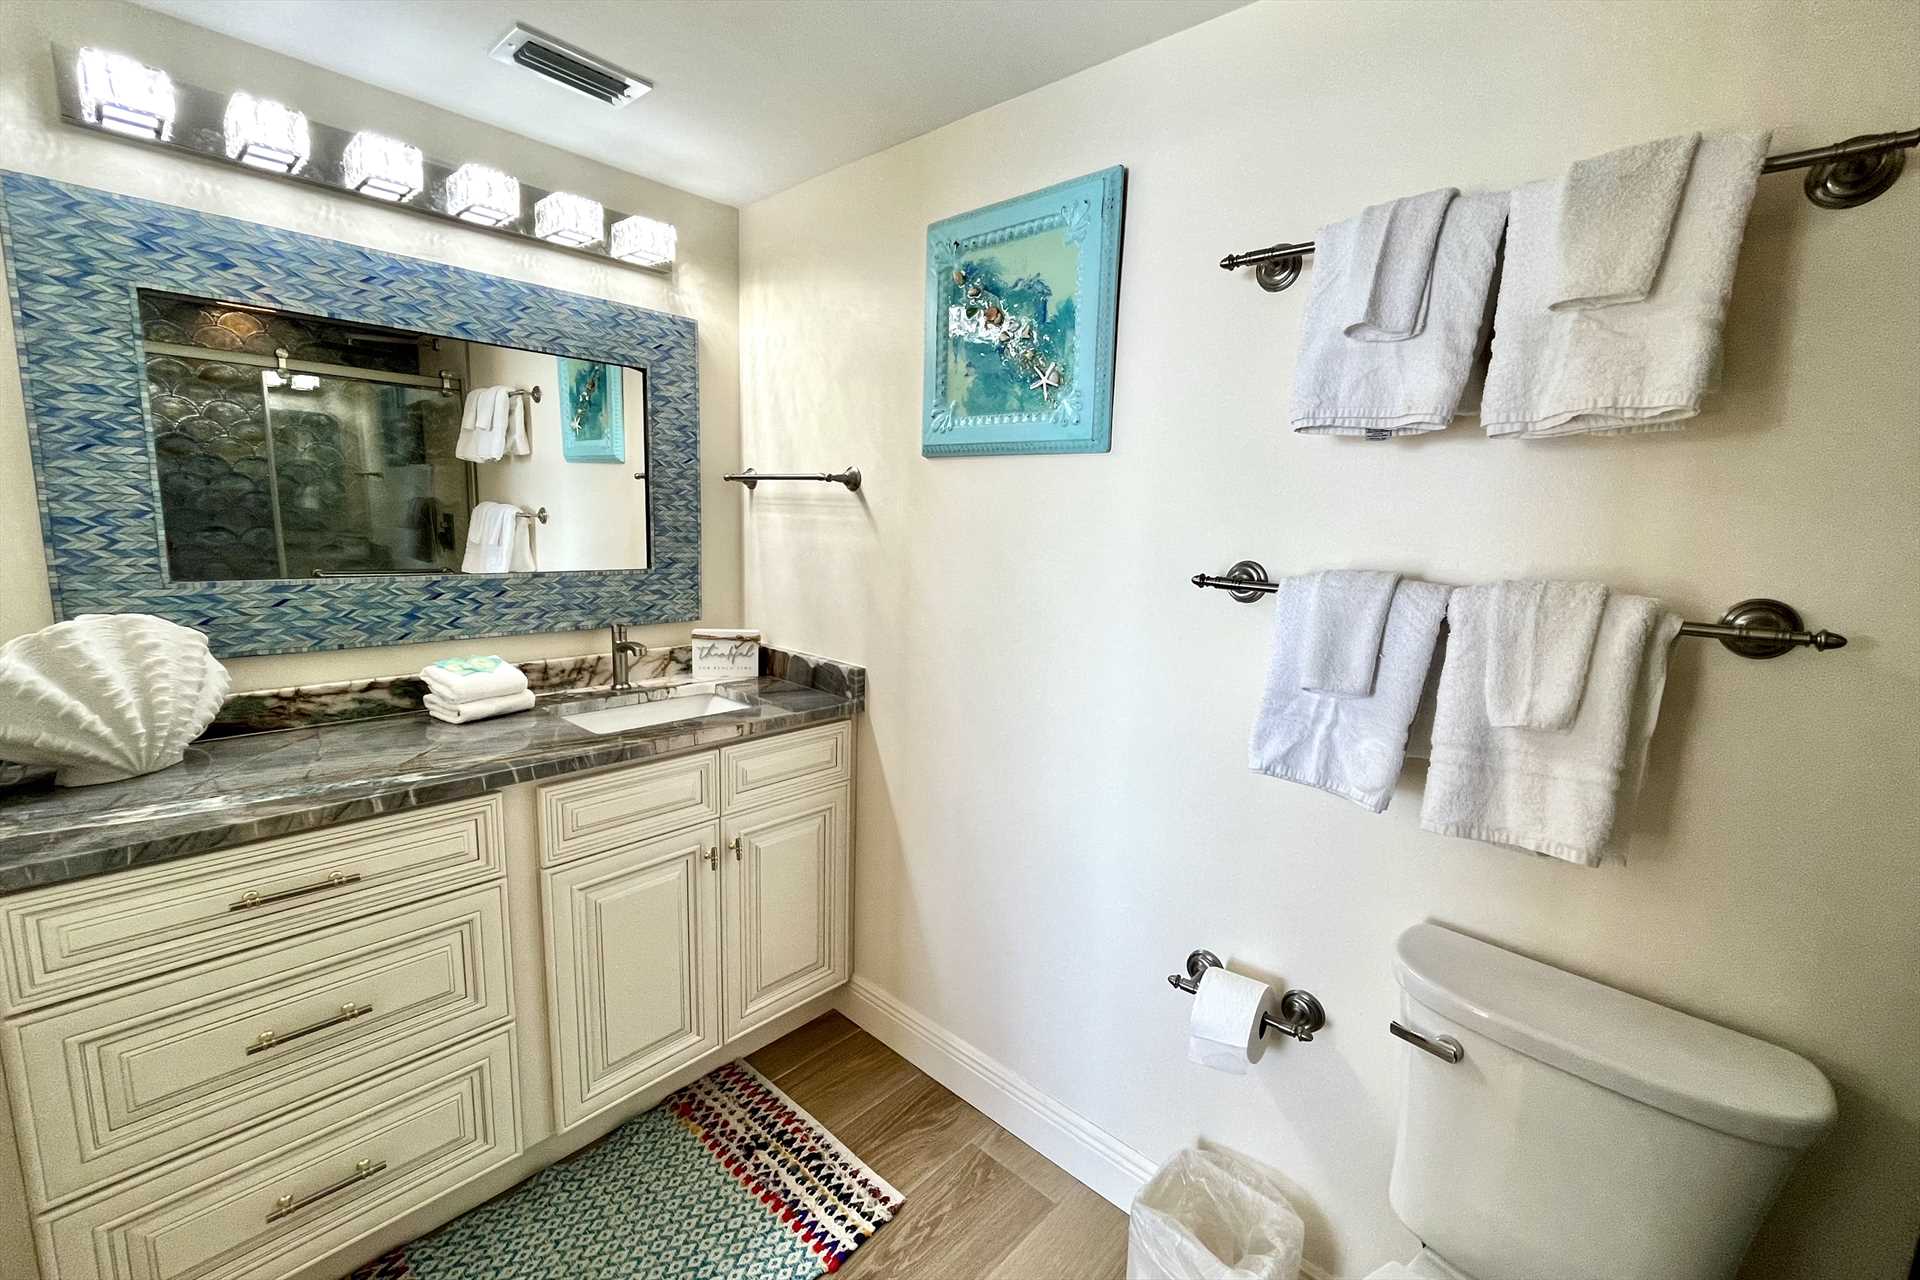 The master bathroom includes a large vanity with plenty of c